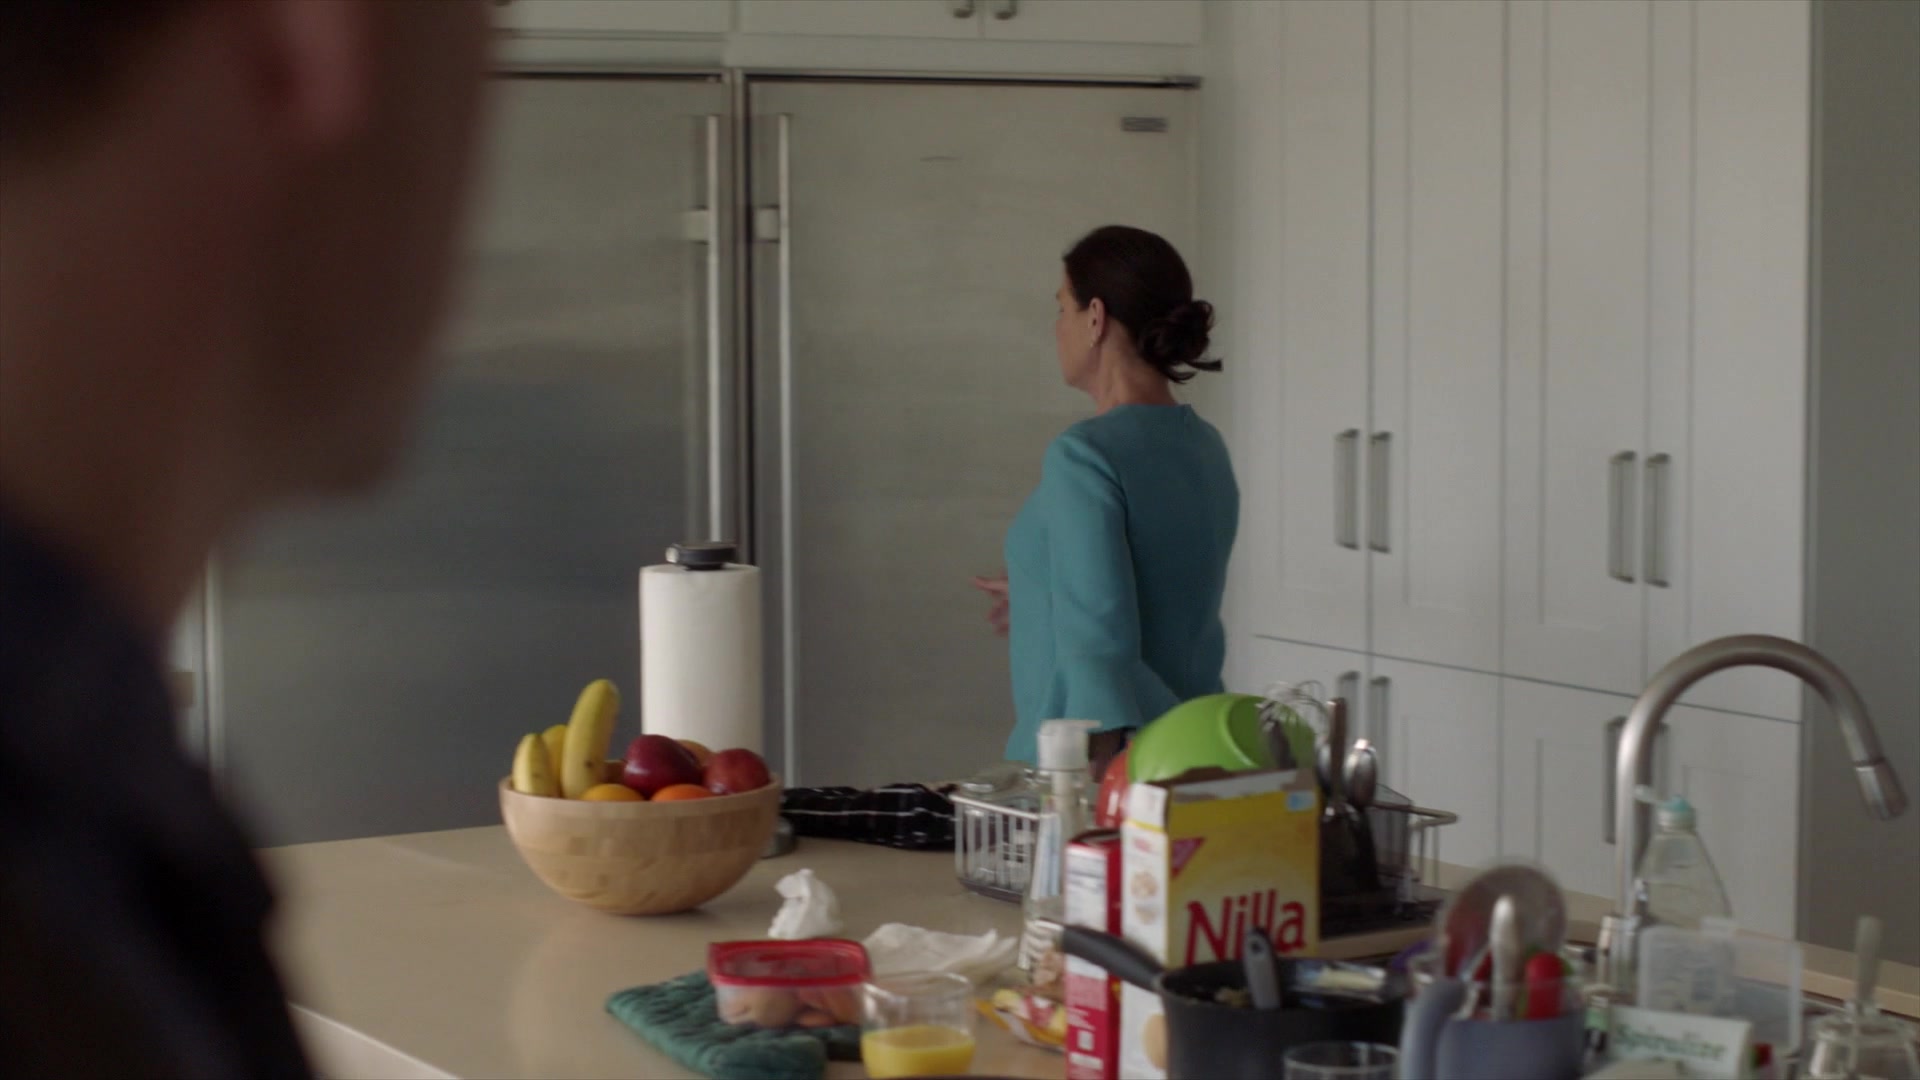 Nilla By Nabisco Wafer-Style Cookies In The Affair - Season 5, Episode ...